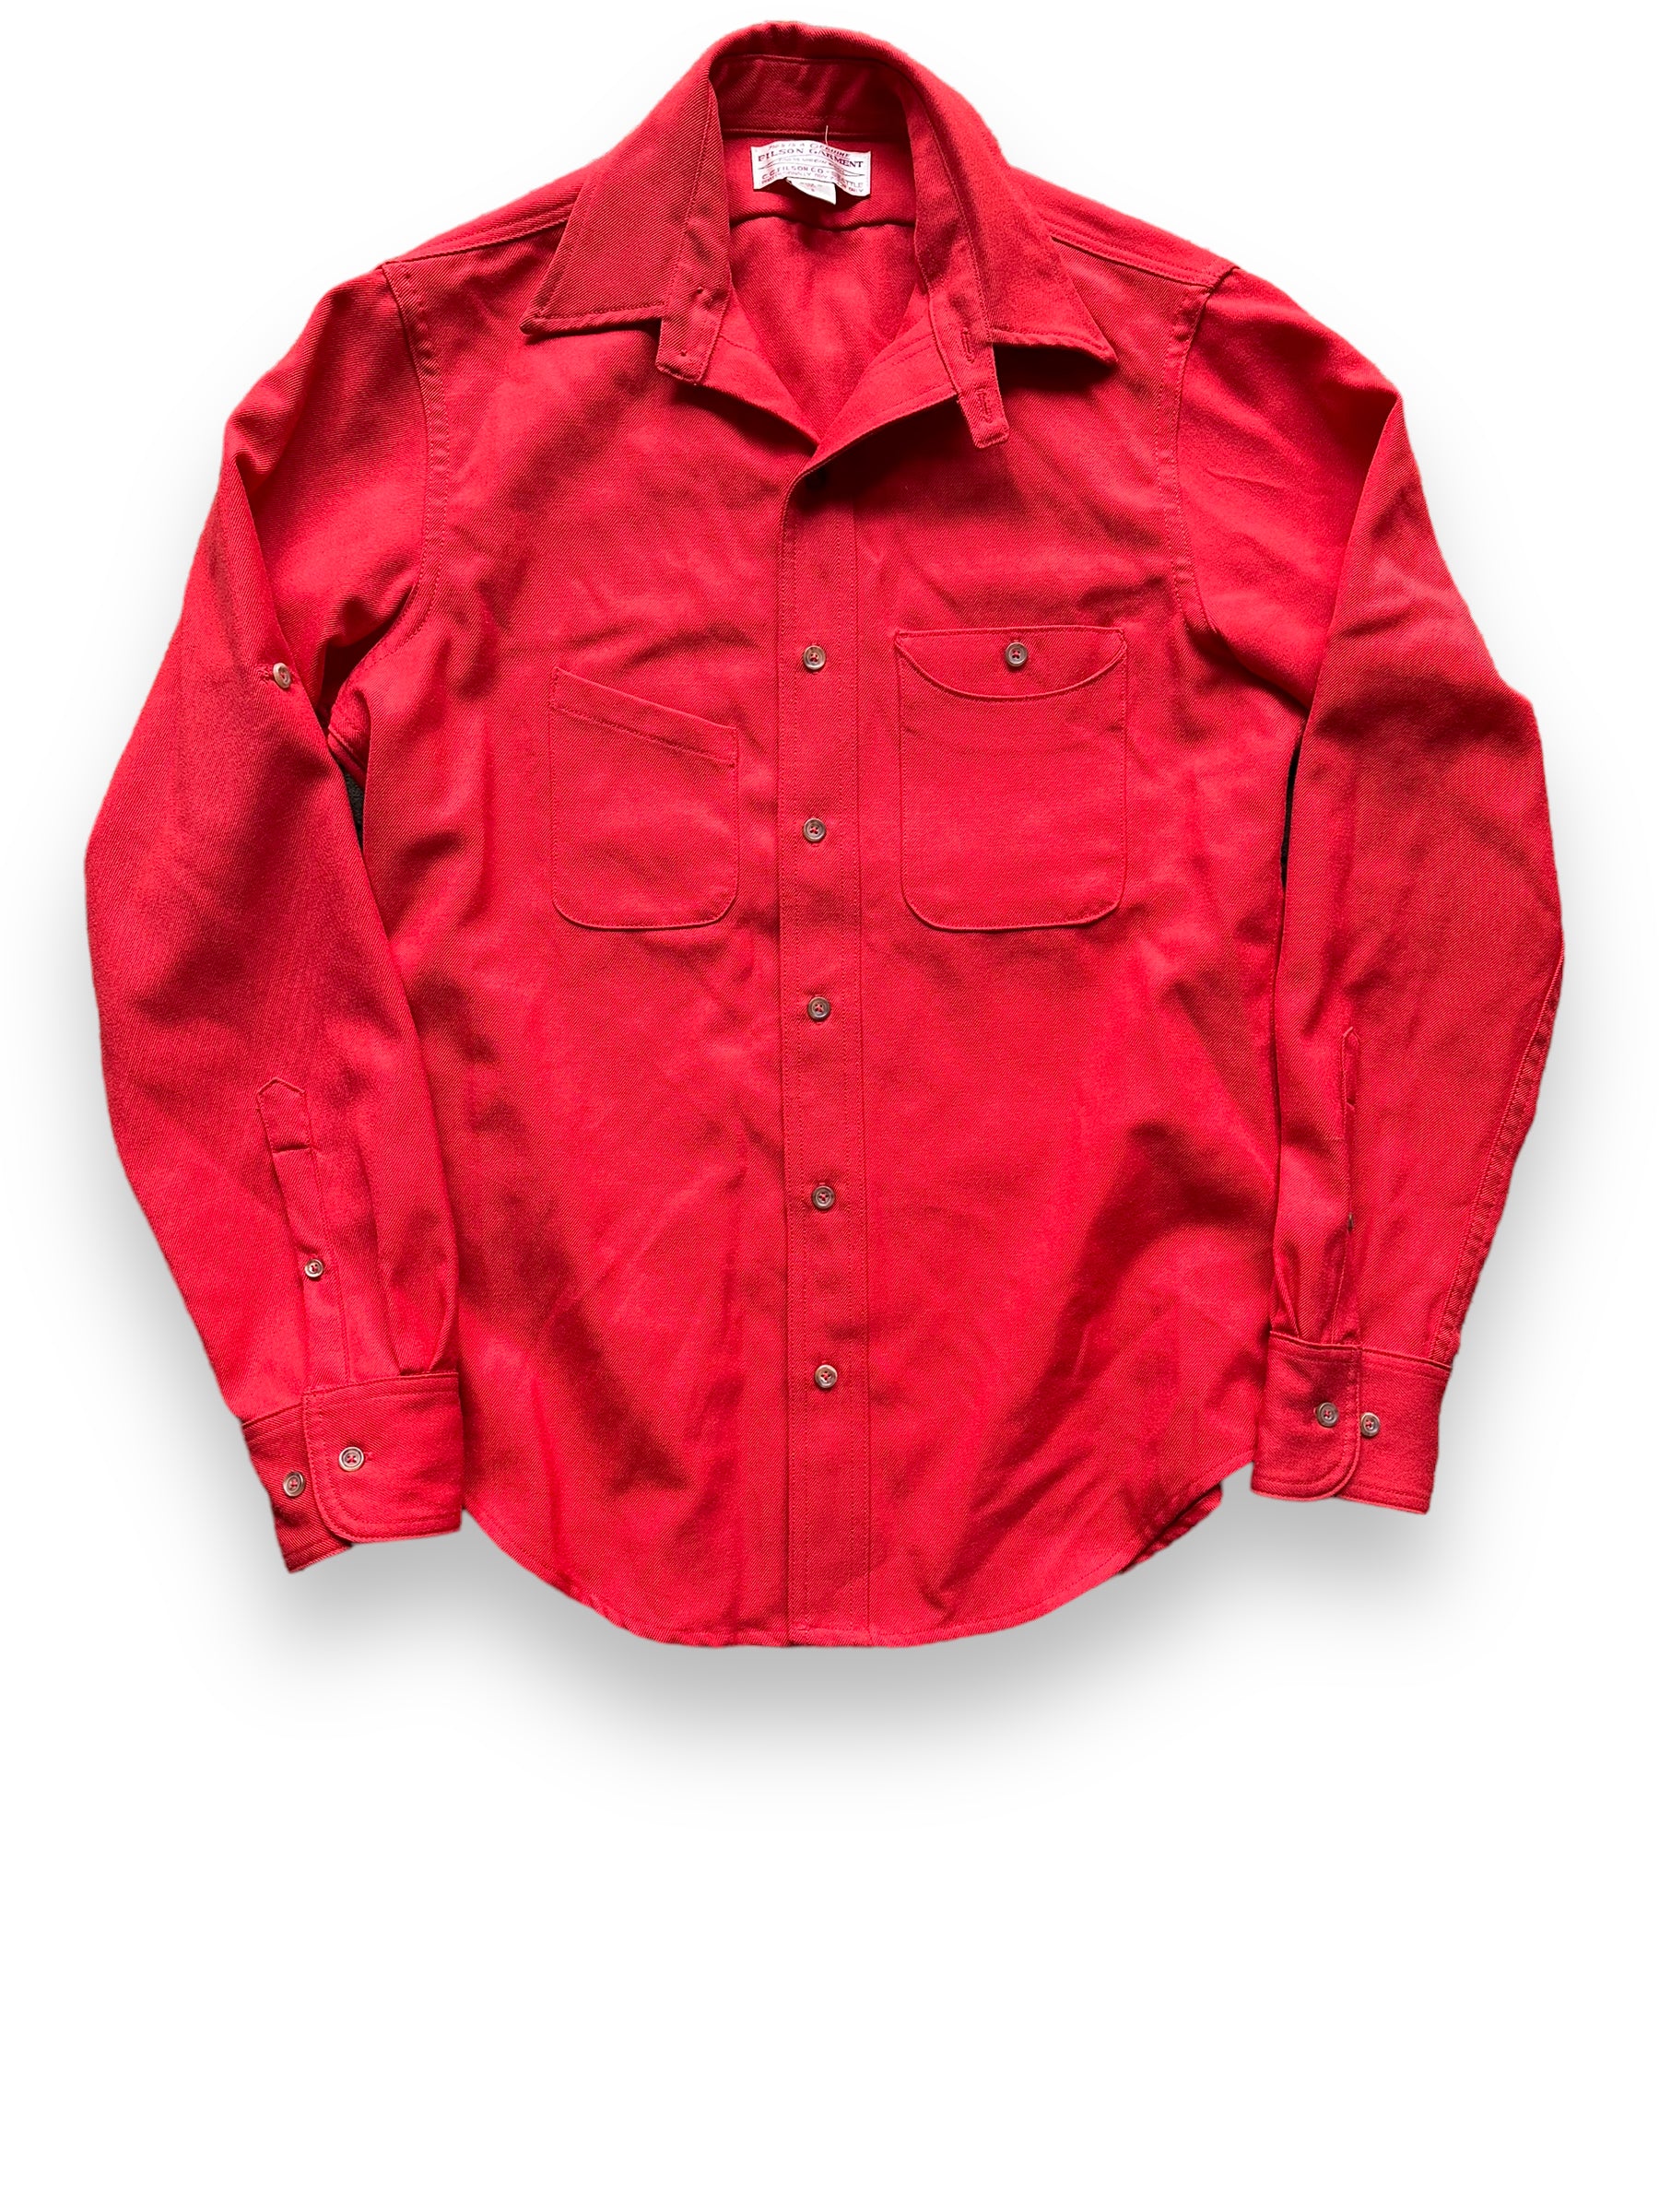 Front View of Filson Merino Wool Red Scout Shirt |  Barn Owl Vintage Goods | Vintage Filson Workwear Seattle